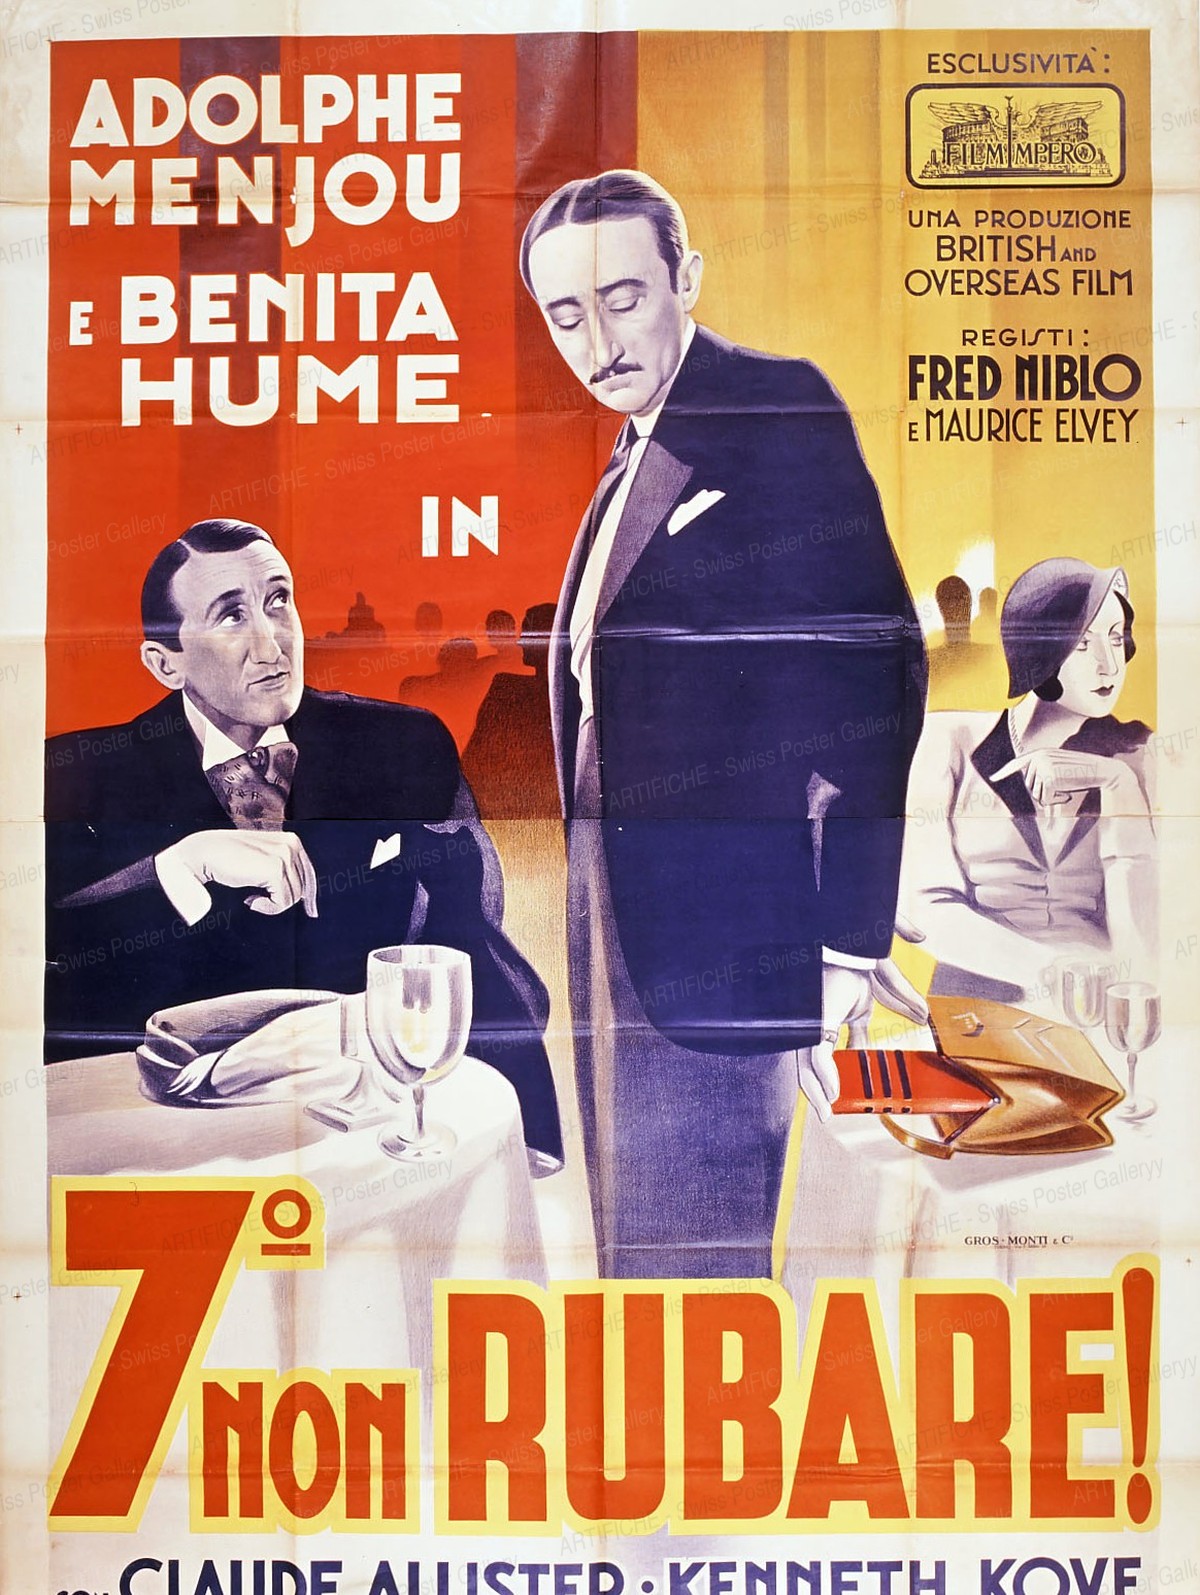 Adolphe Menjou and Benita Hume in [Diamond Cut Diamond] with Claude Allister and Kenneth Kove – Directors: Fred Niblo and Maurice Elvey, Artist unknown